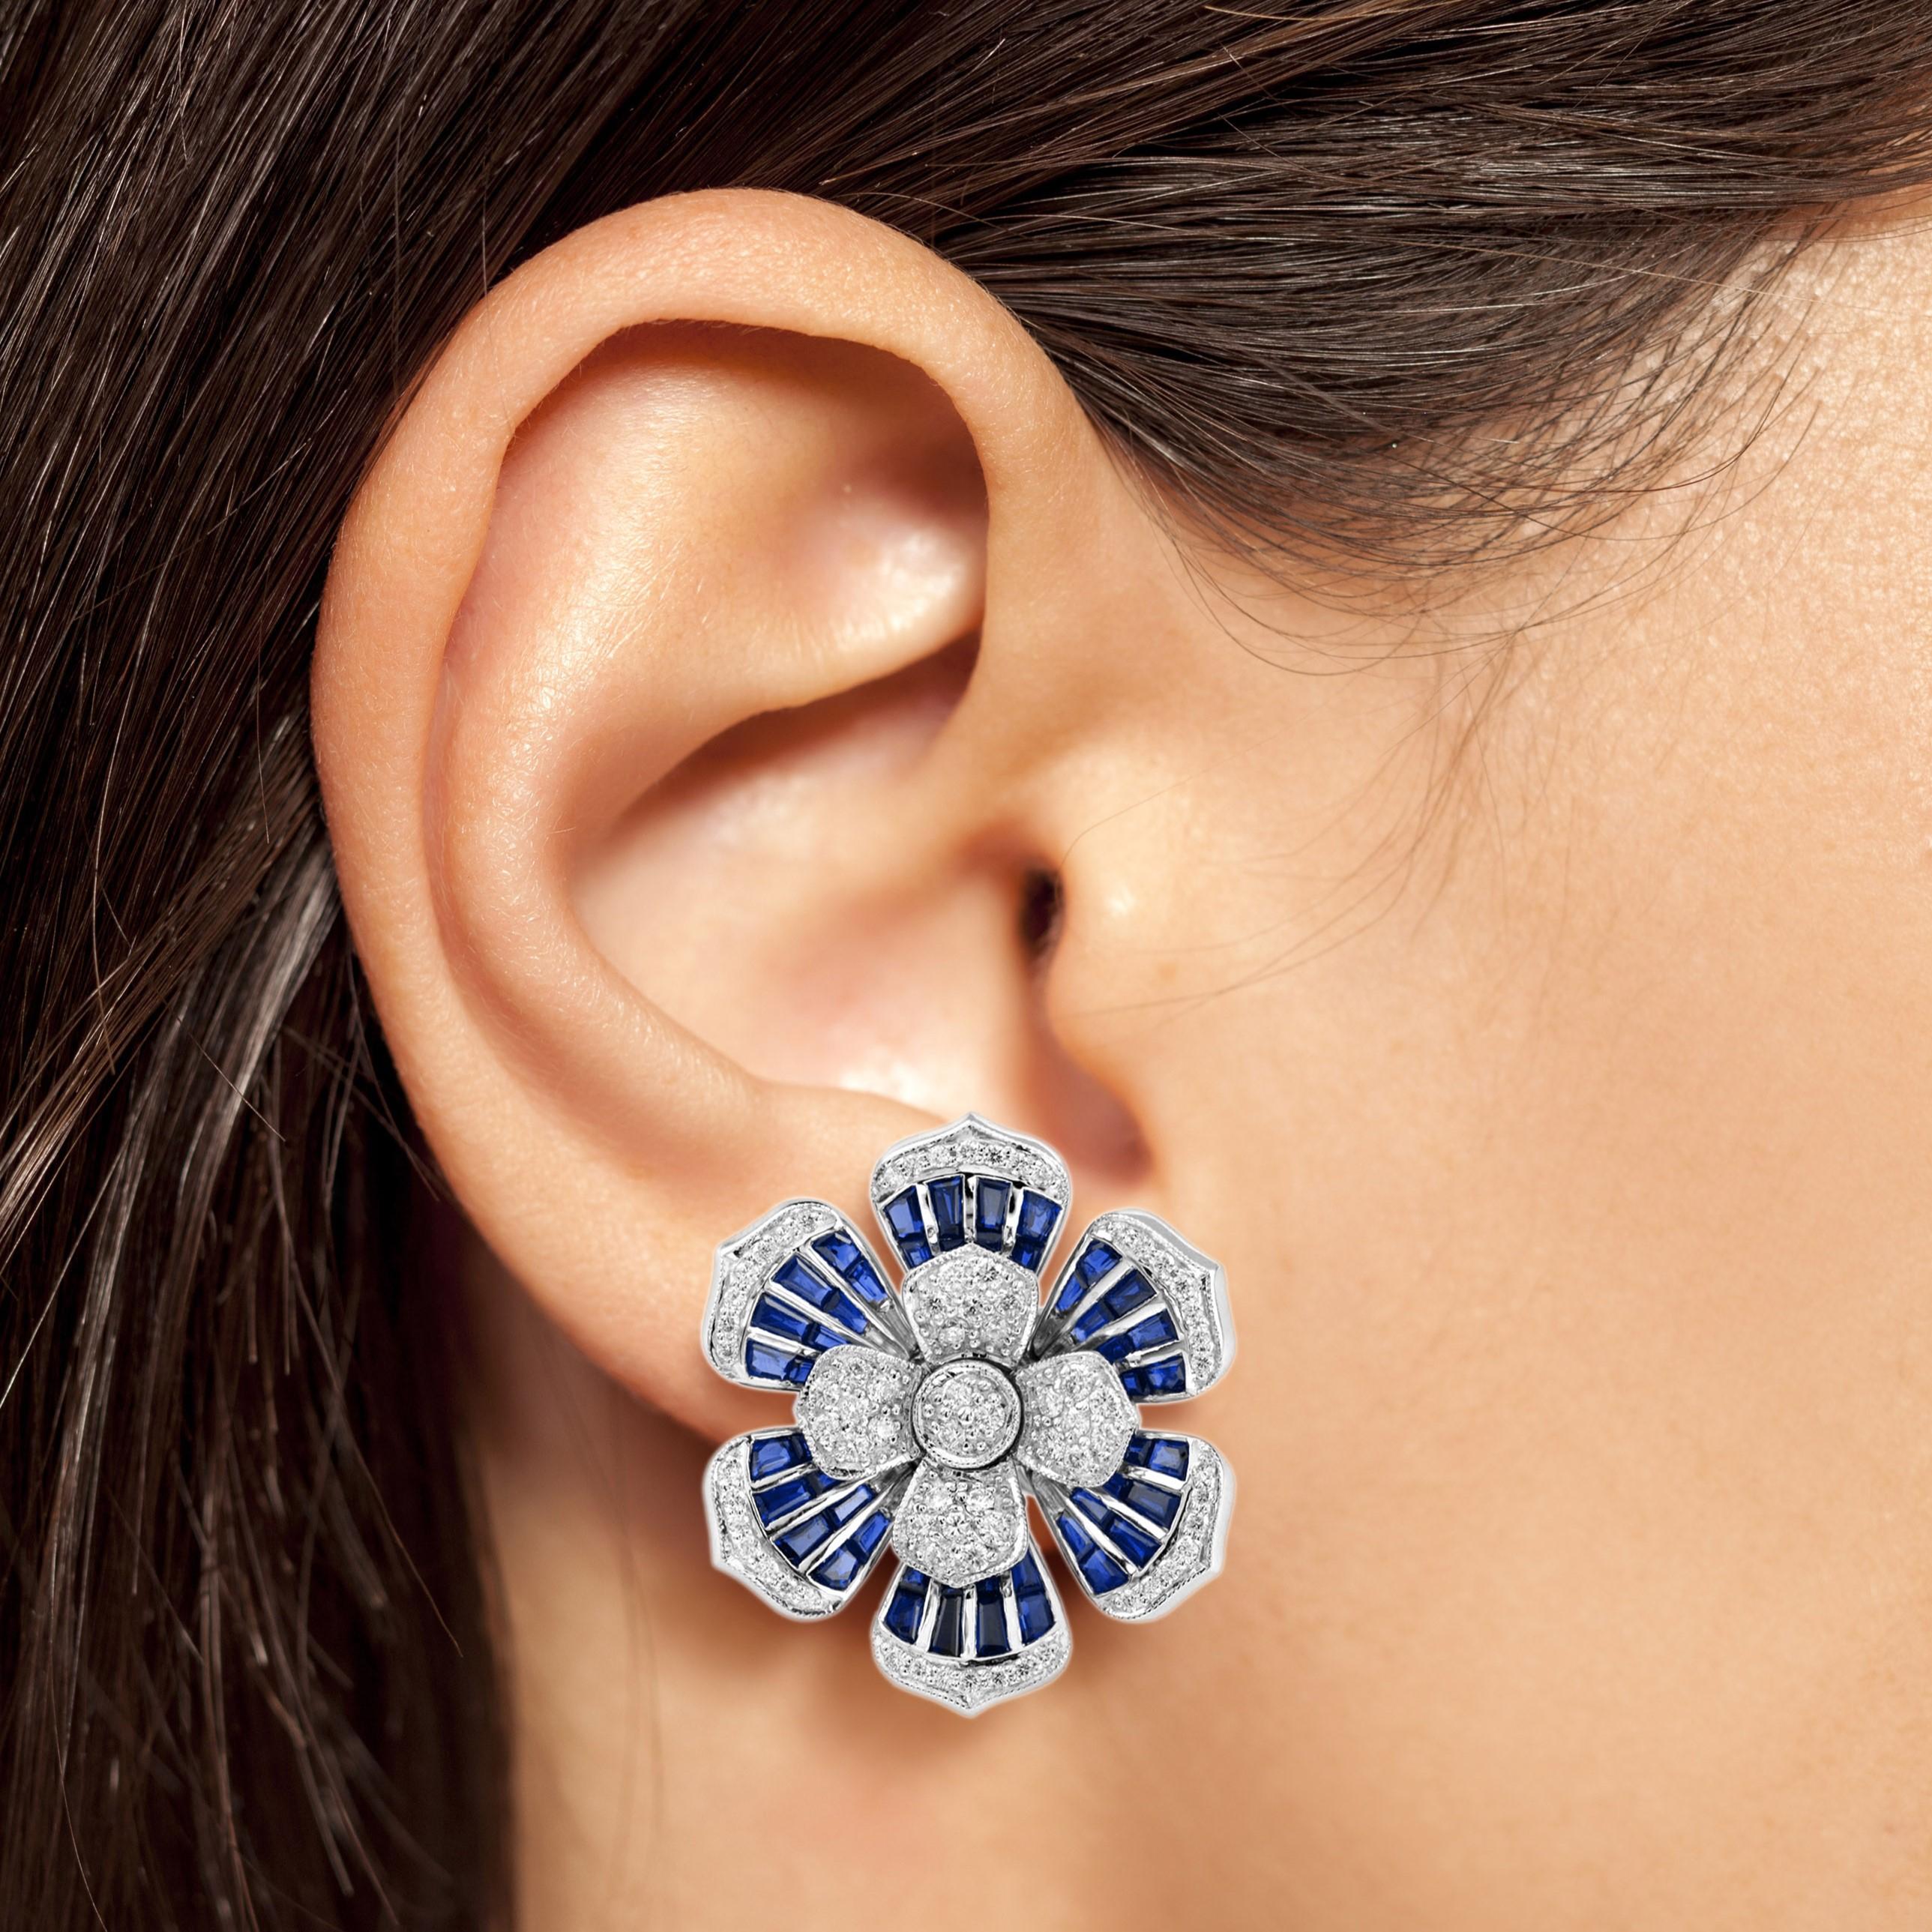 Shine bright with these stunning diamond and sapphire earrings. The earrings features 146 round cut diamonds and 96 French cut blue sapphires. These magnificent and timeless earrings would add a touch of grace and elegance to any occasion!

Earrings